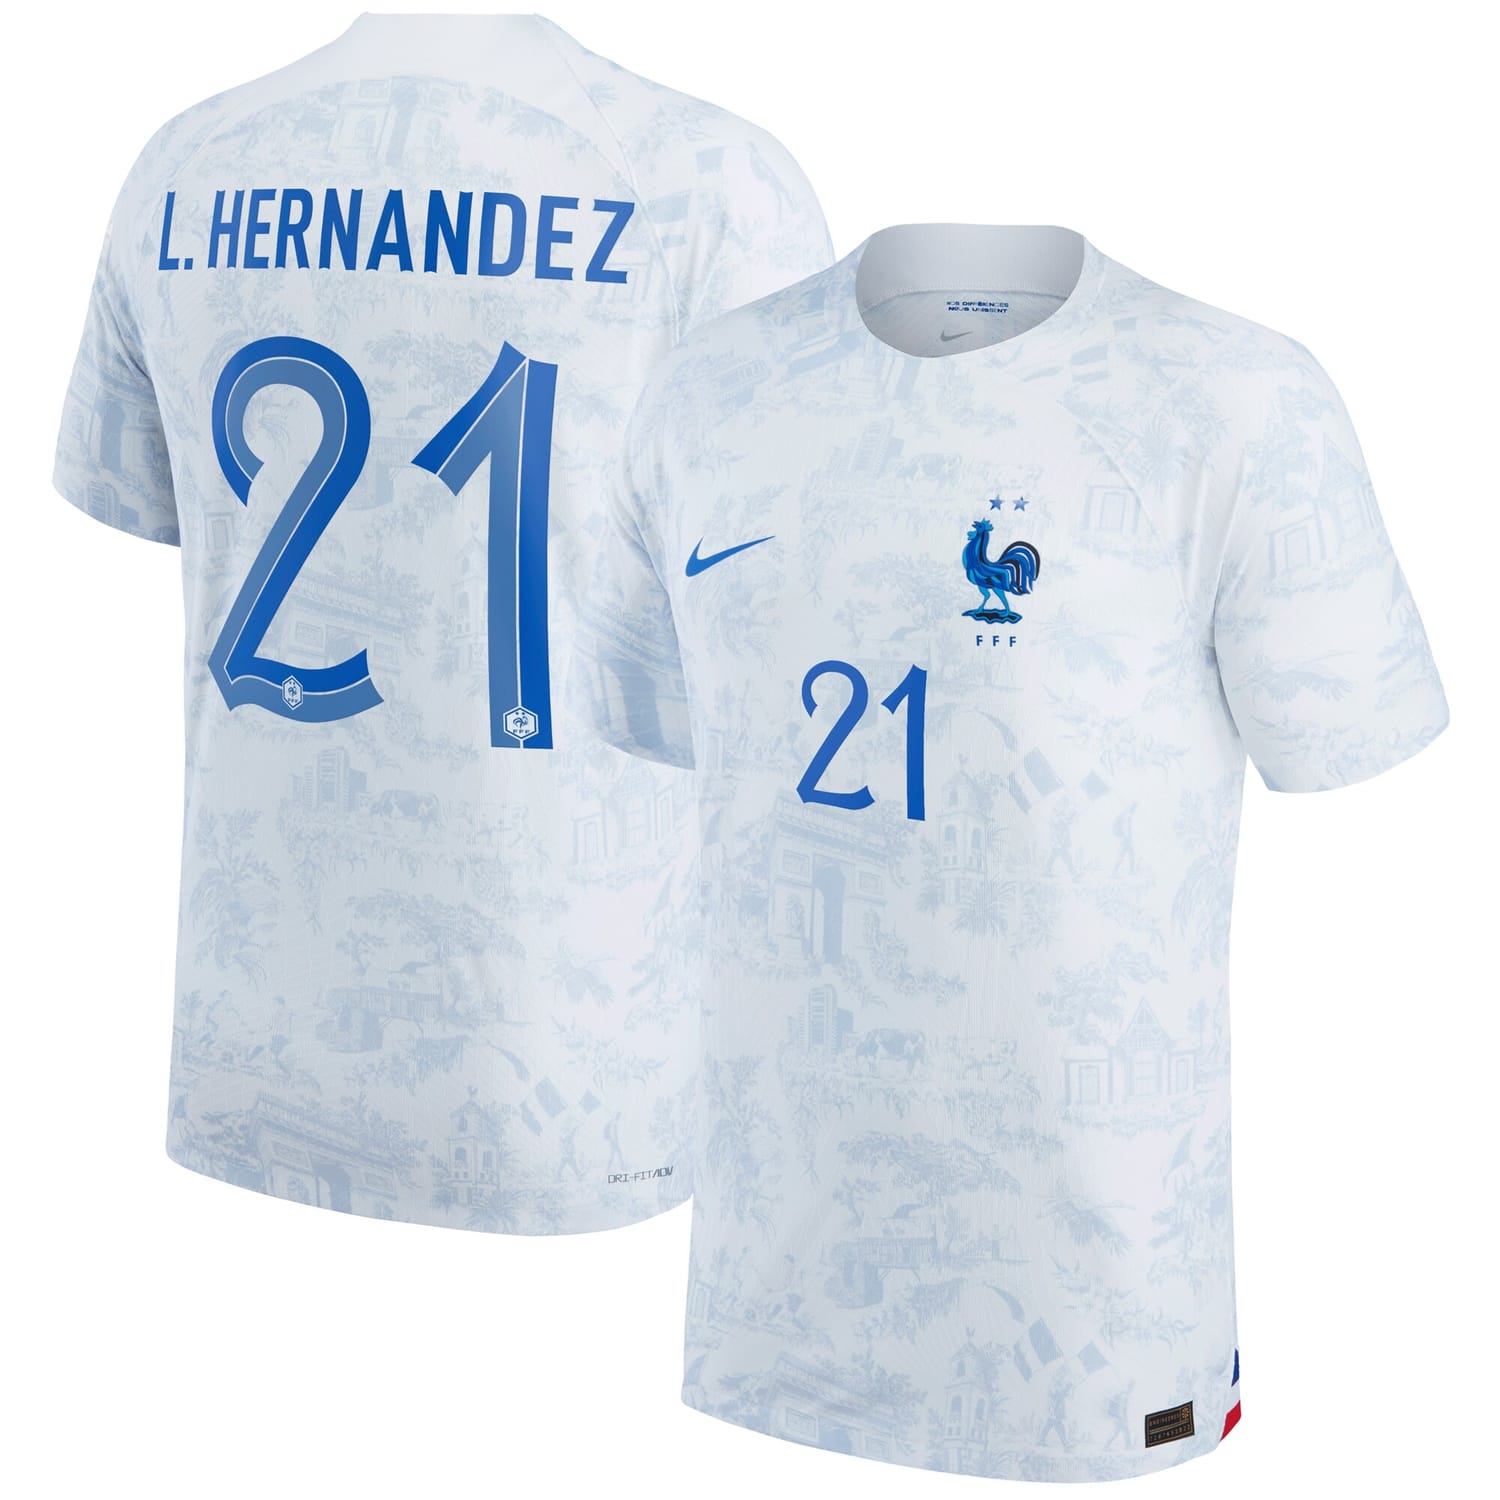 France National Team Away Authentic Jersey Shirt 2022 player Lucas Hernandez 21 printing for Men